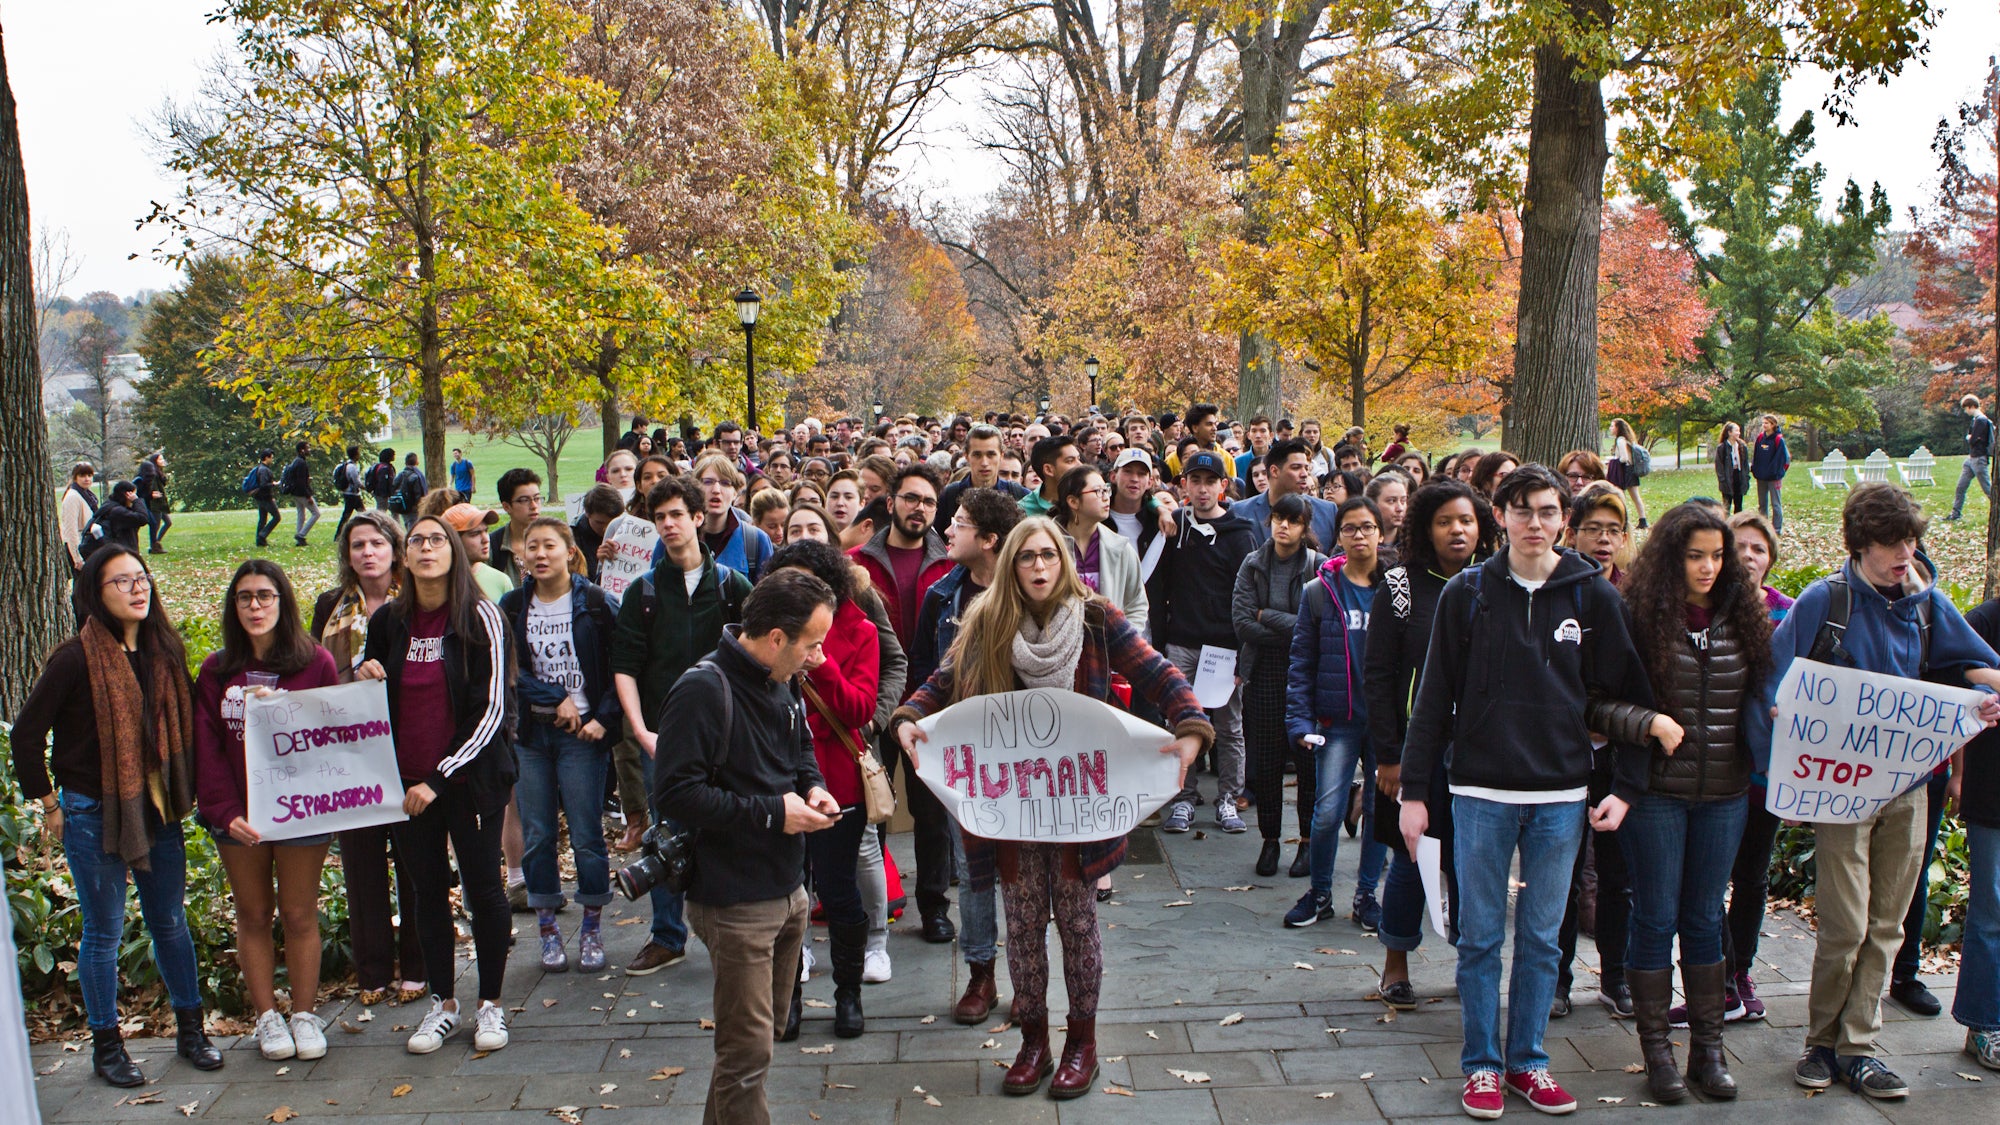 Students walkout to demand their school Swarthmore College become a sanctuary campus. (Kimberly Paynter/WHYY)